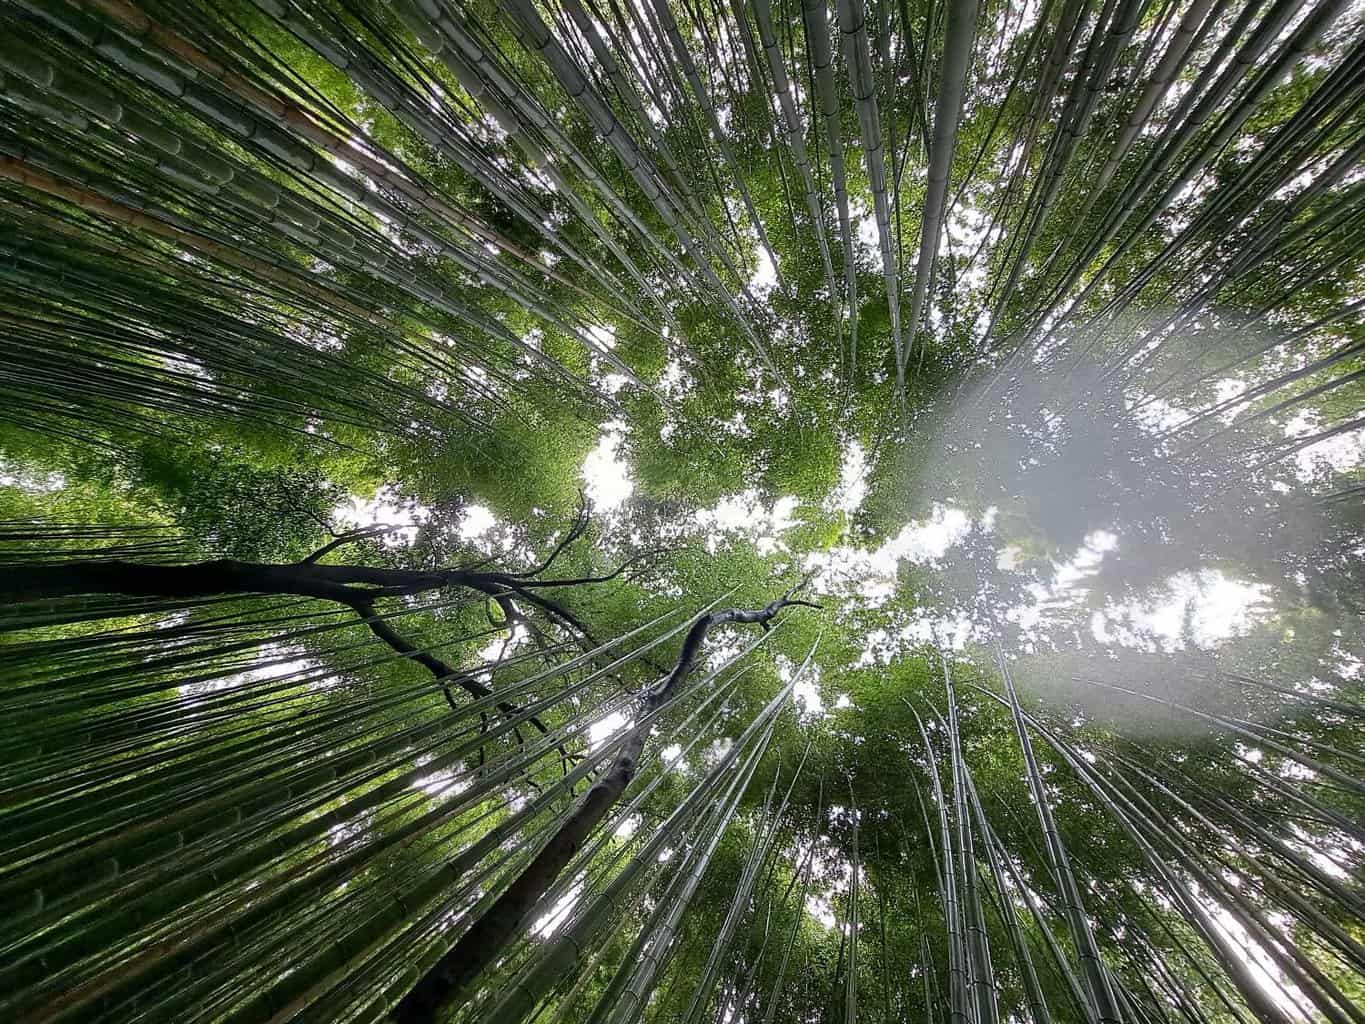 Looking up to the tops of the trees in Arashiyama Bamboo Forest, Japan